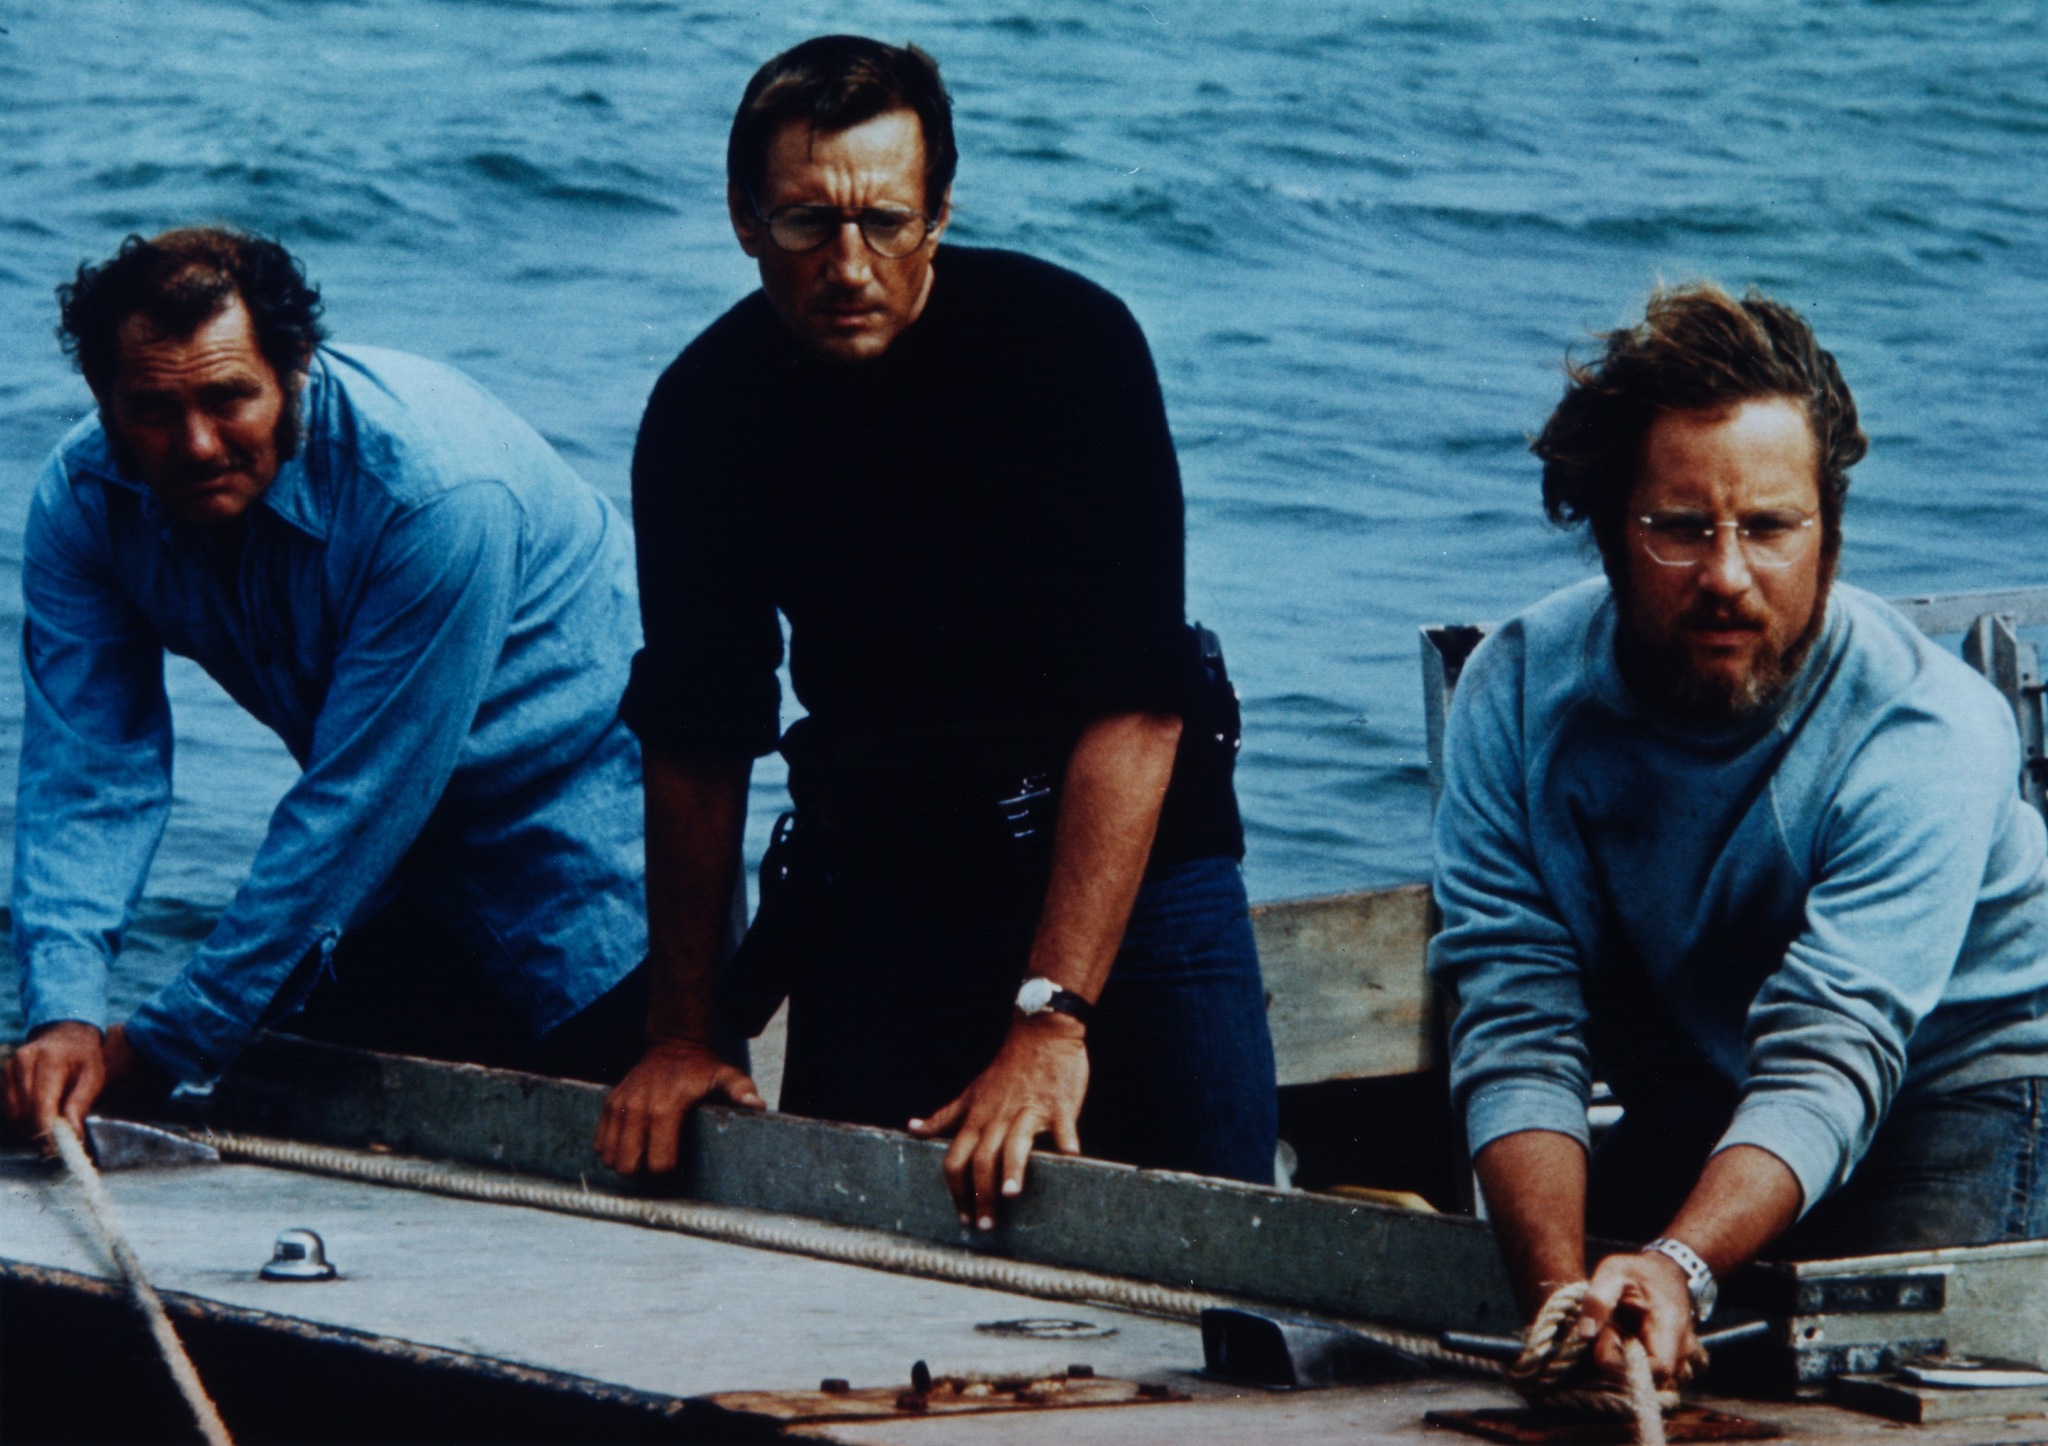 3. Jaws $408.0 million. Number of films: 5. First film: Jaws (1975) $260.0 million. Highest-grossing film: Jaws (1975) $260.0 million.